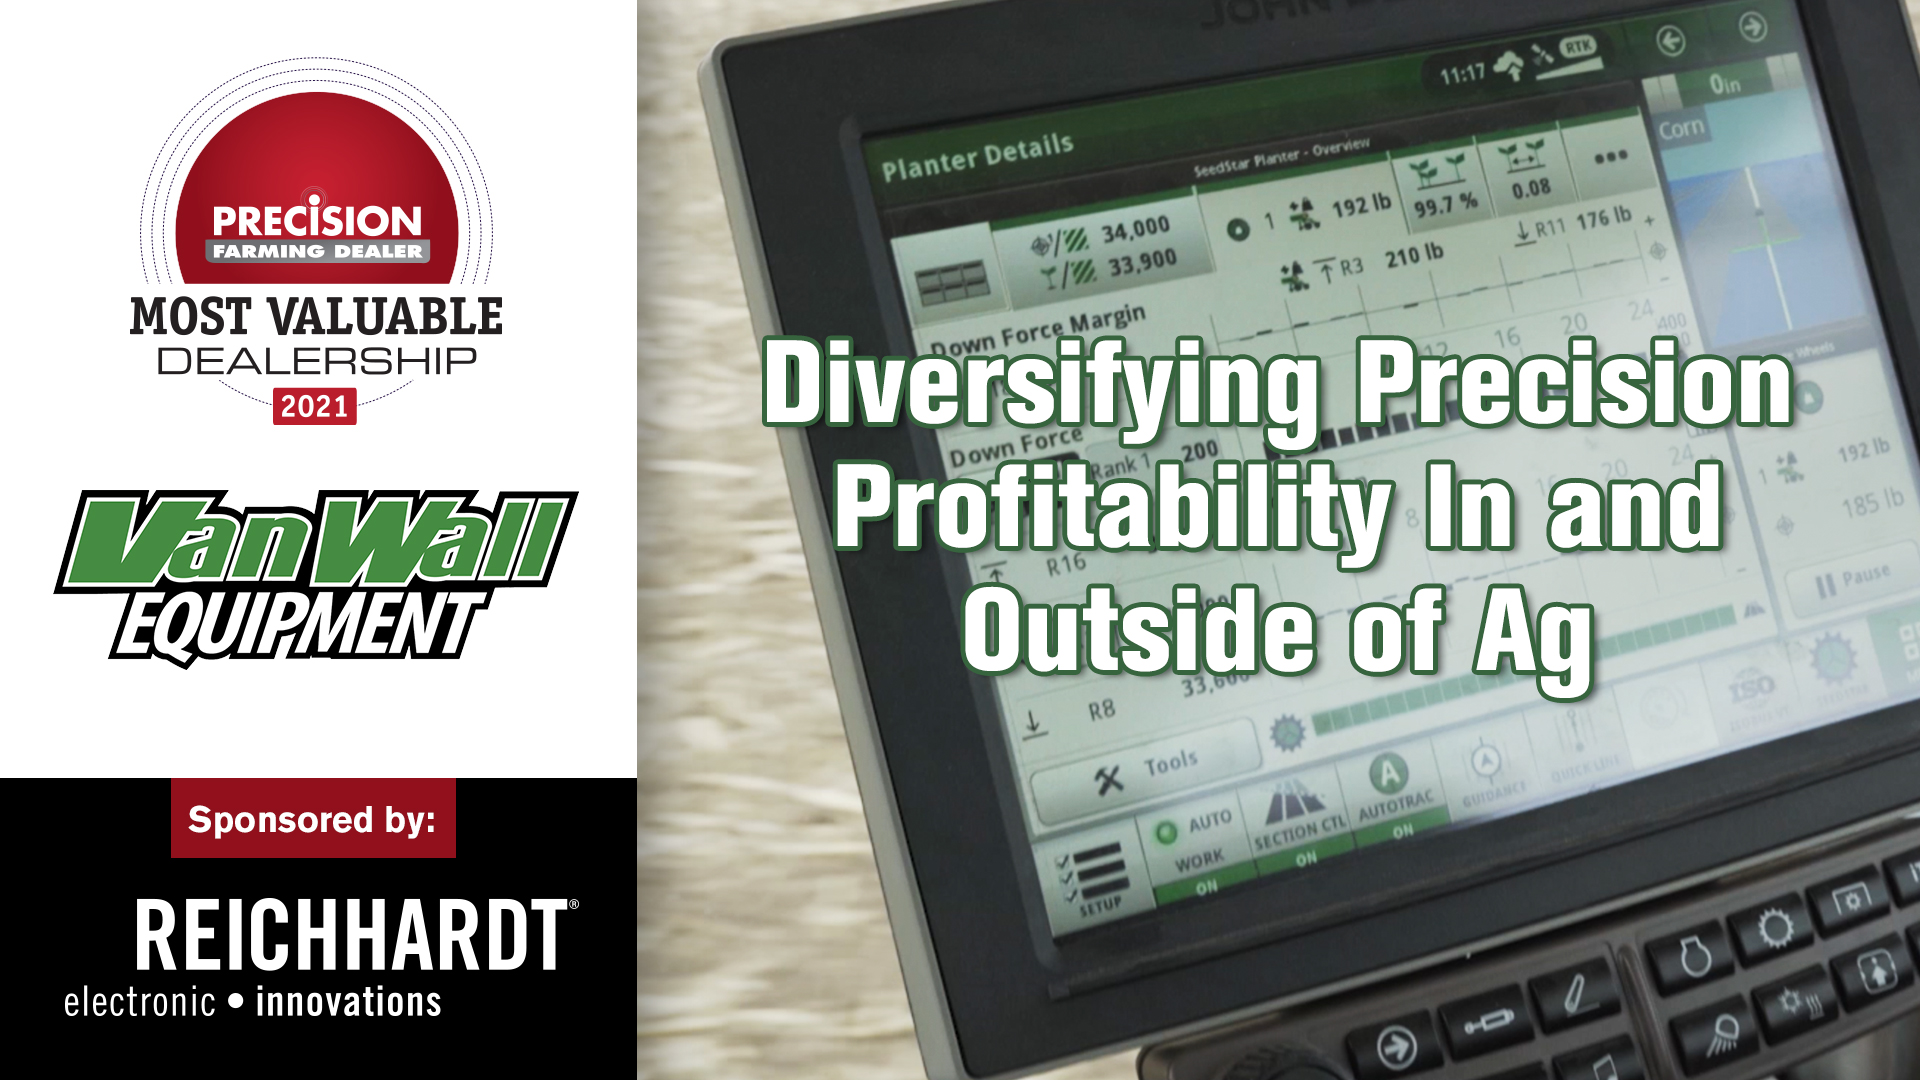 Diversifying-Precision-Profitability-In-and-Outside-of-Ag.jpg